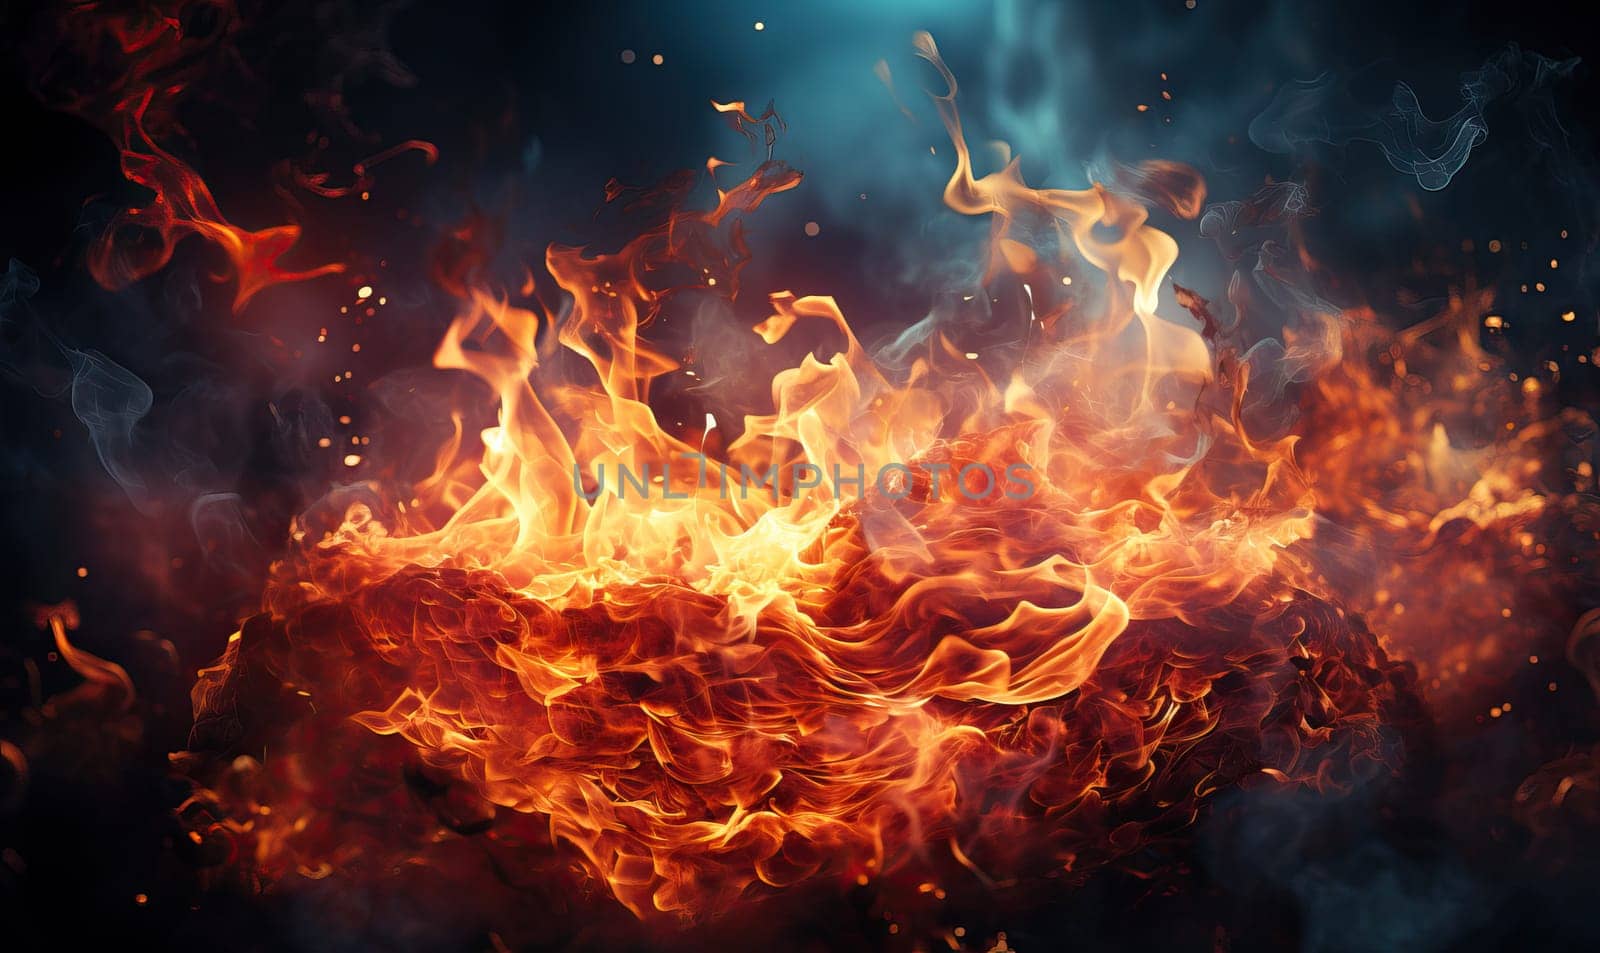 Abstract background with fire effect full frame. by Fischeron